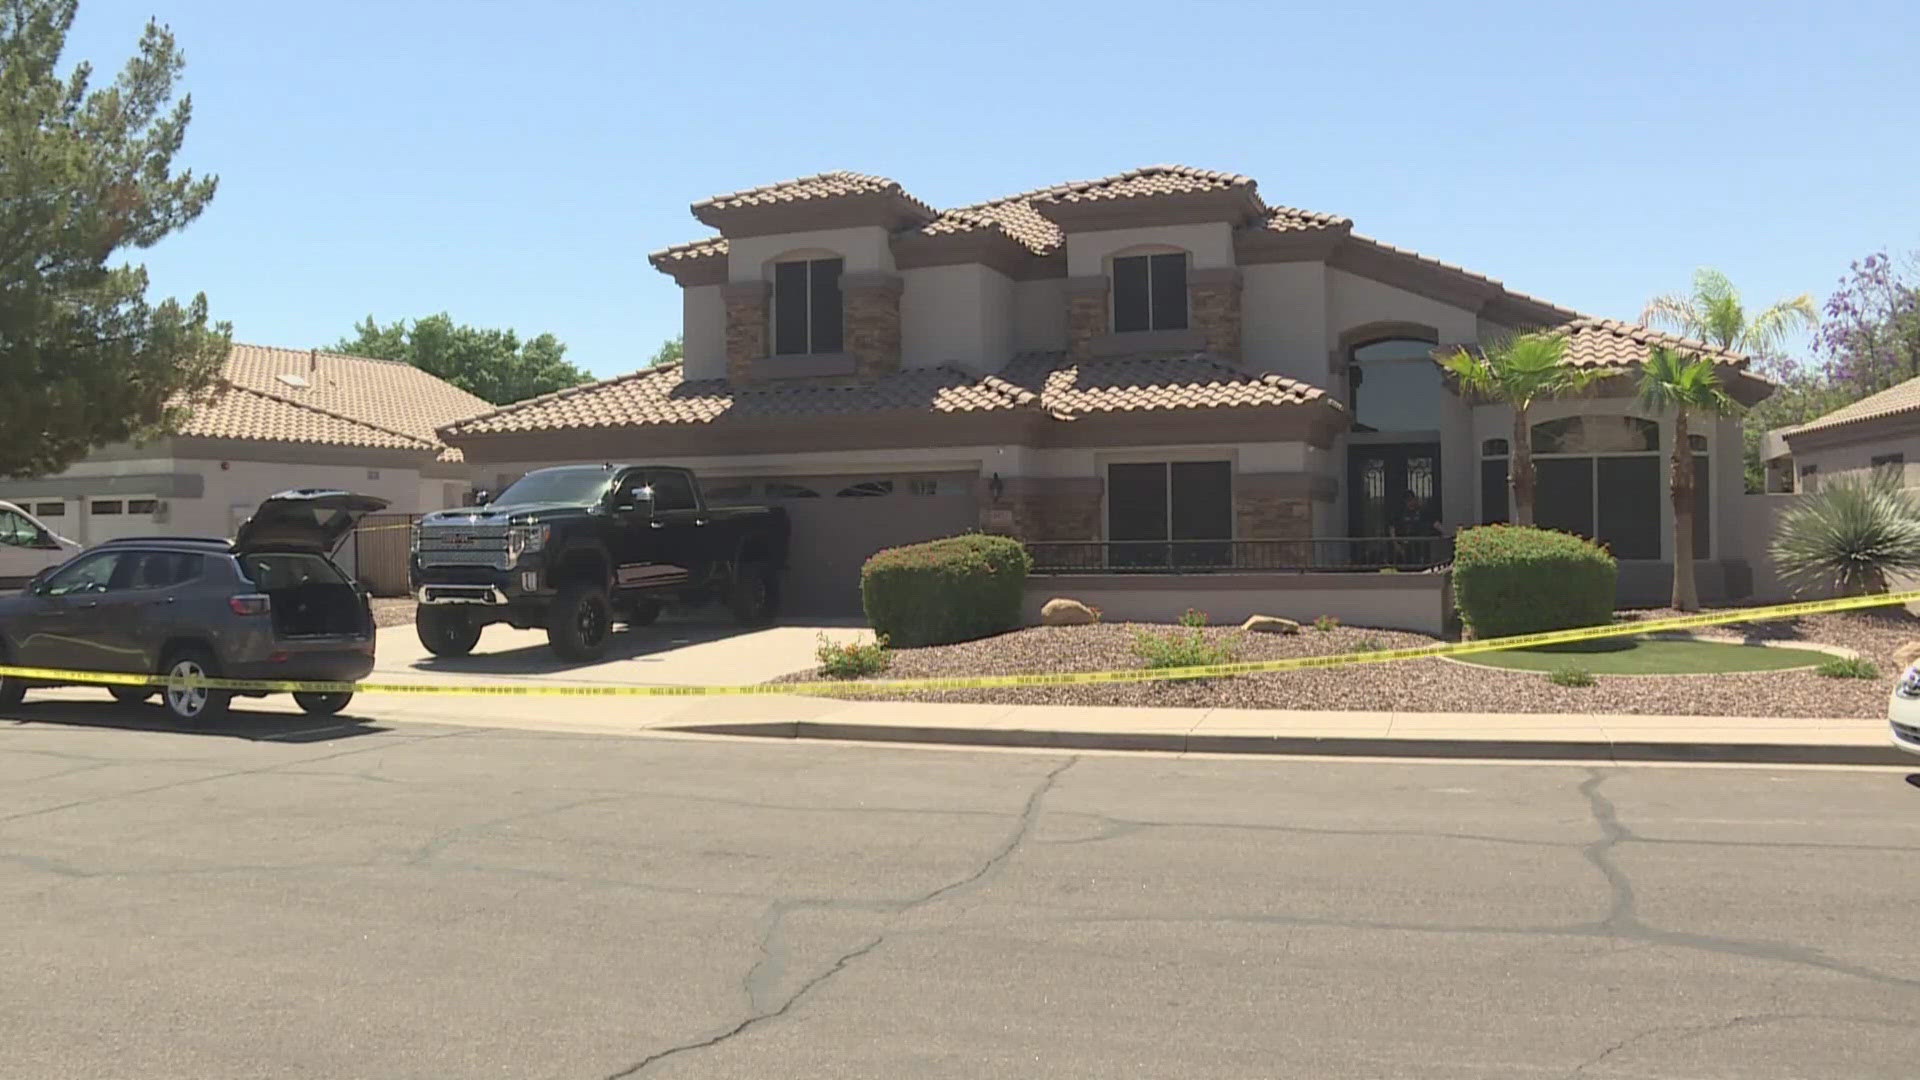 Gilbert police said the bodies were found in a home near Ray Road and Val Vista Drive overnight on Monday.